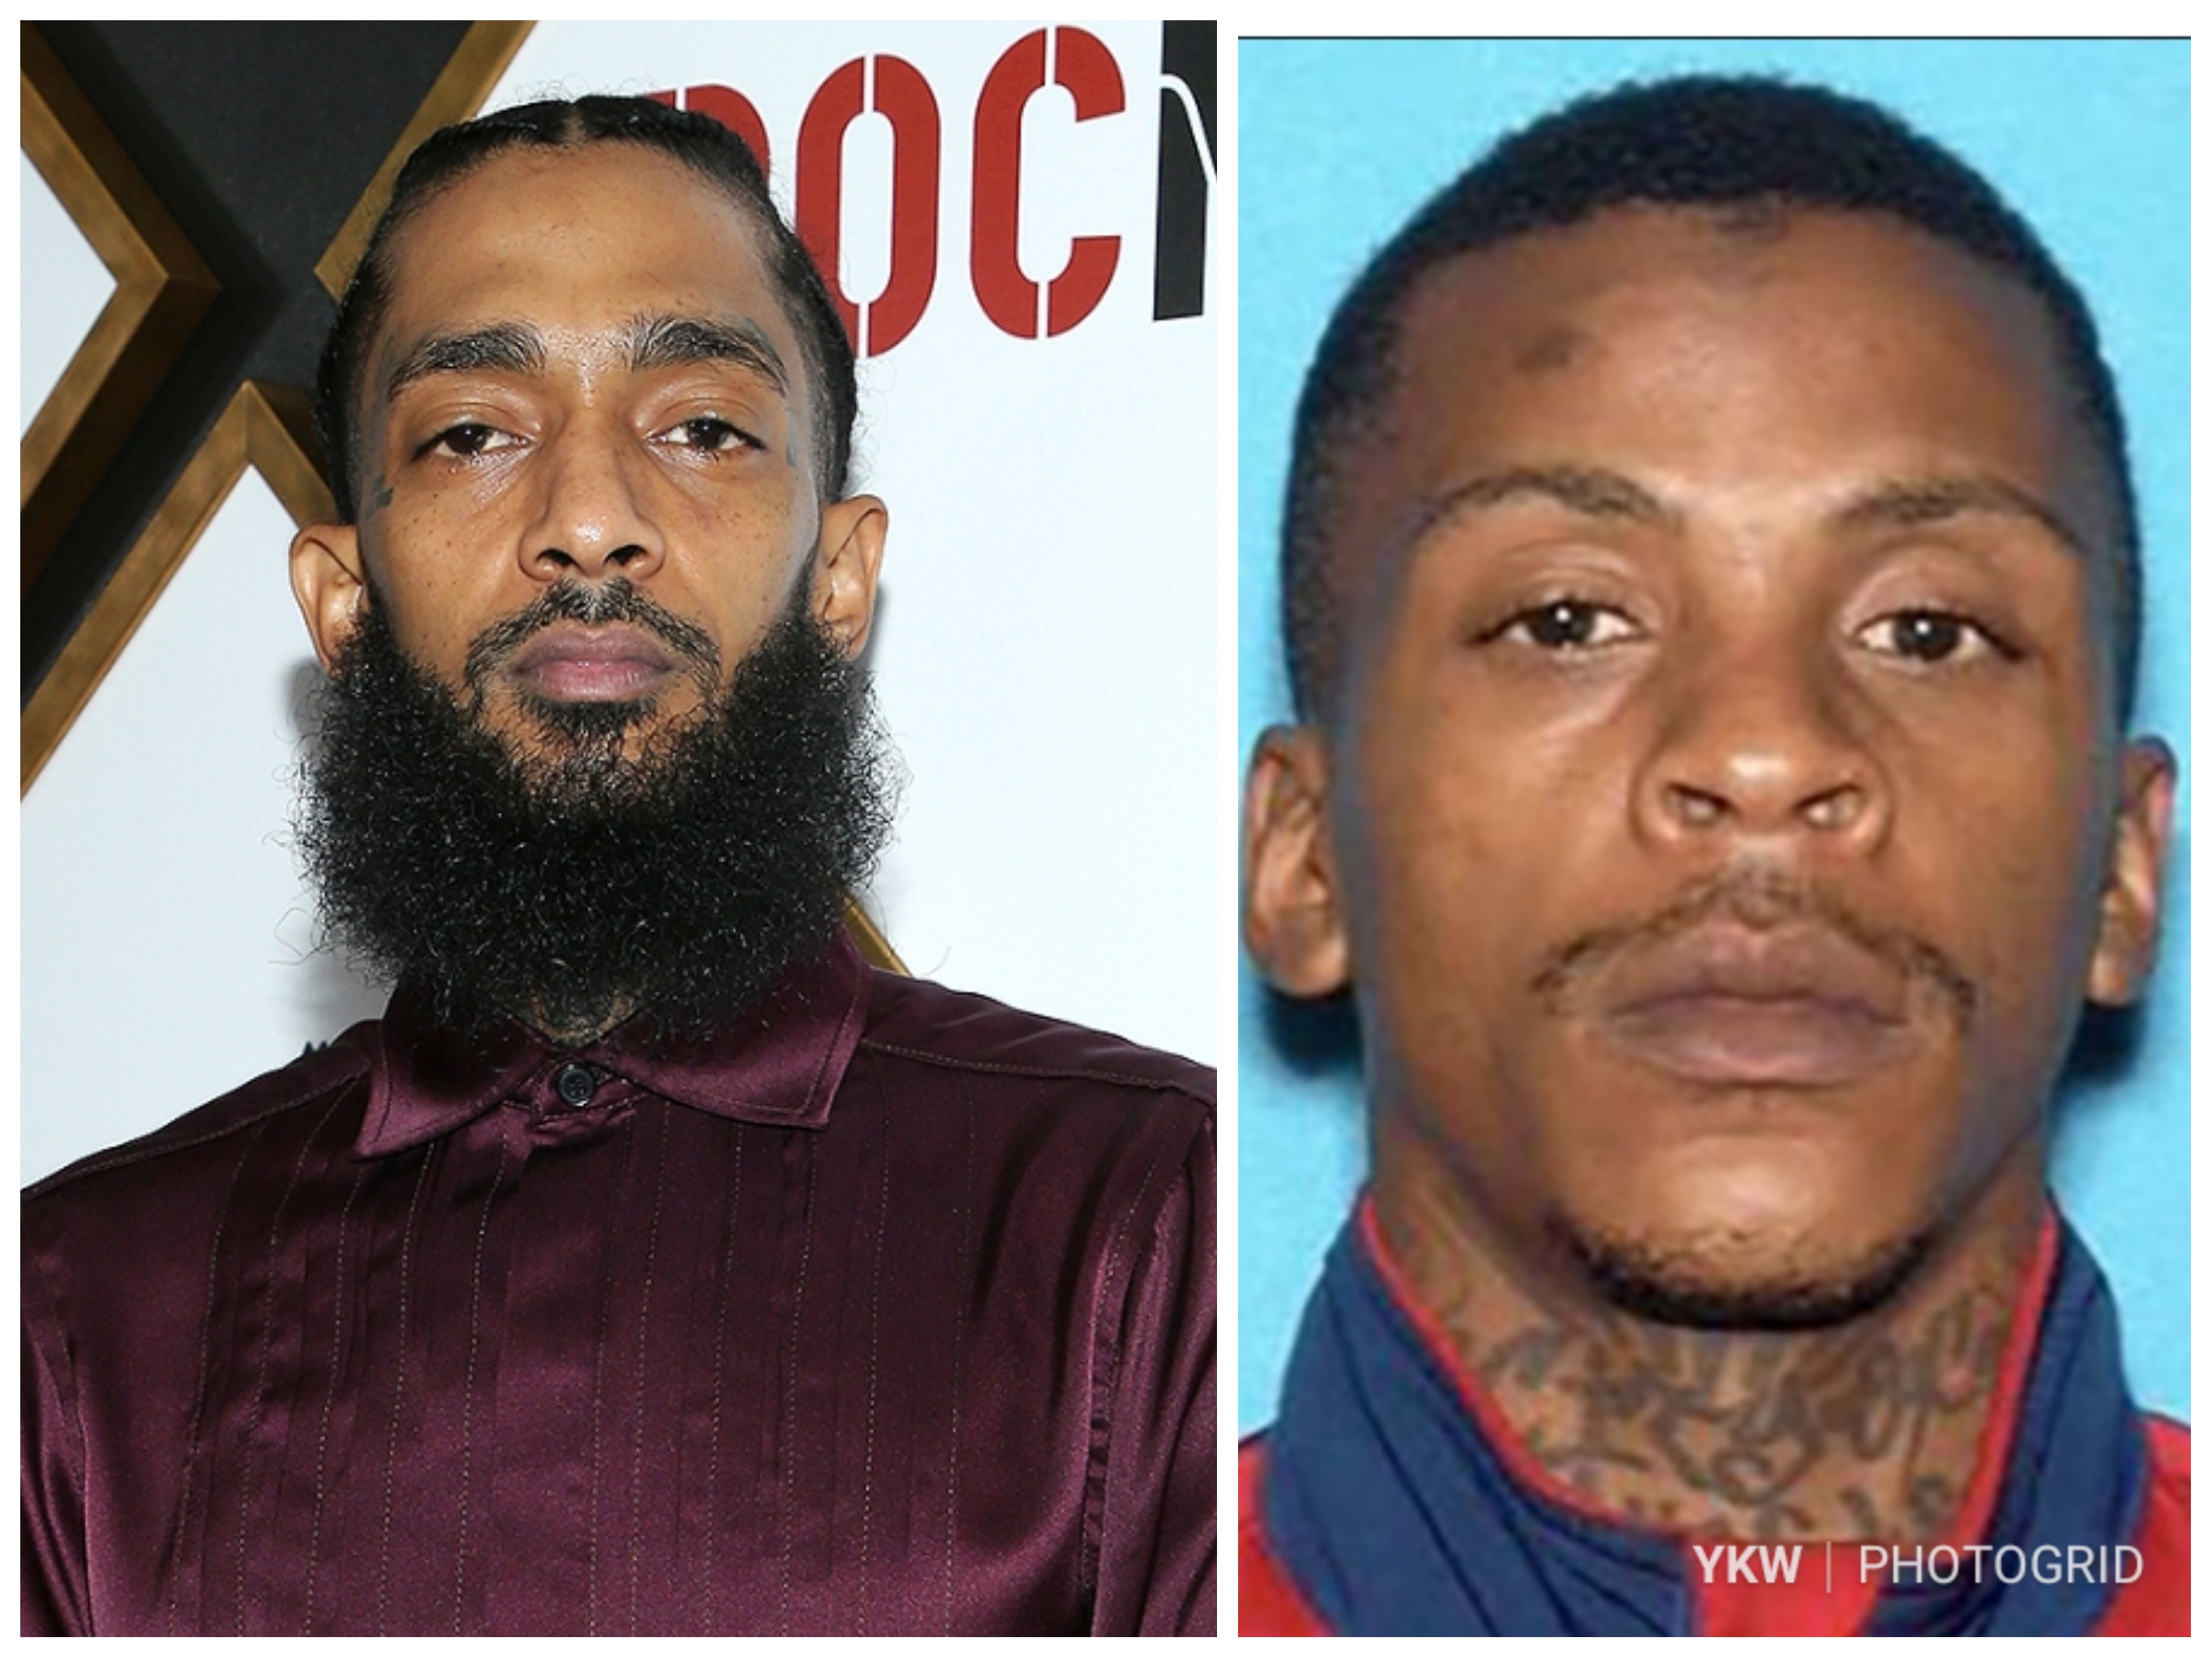 A Suspect In The Killing Of Nipsey Hussle Has Been Identified By LAPD